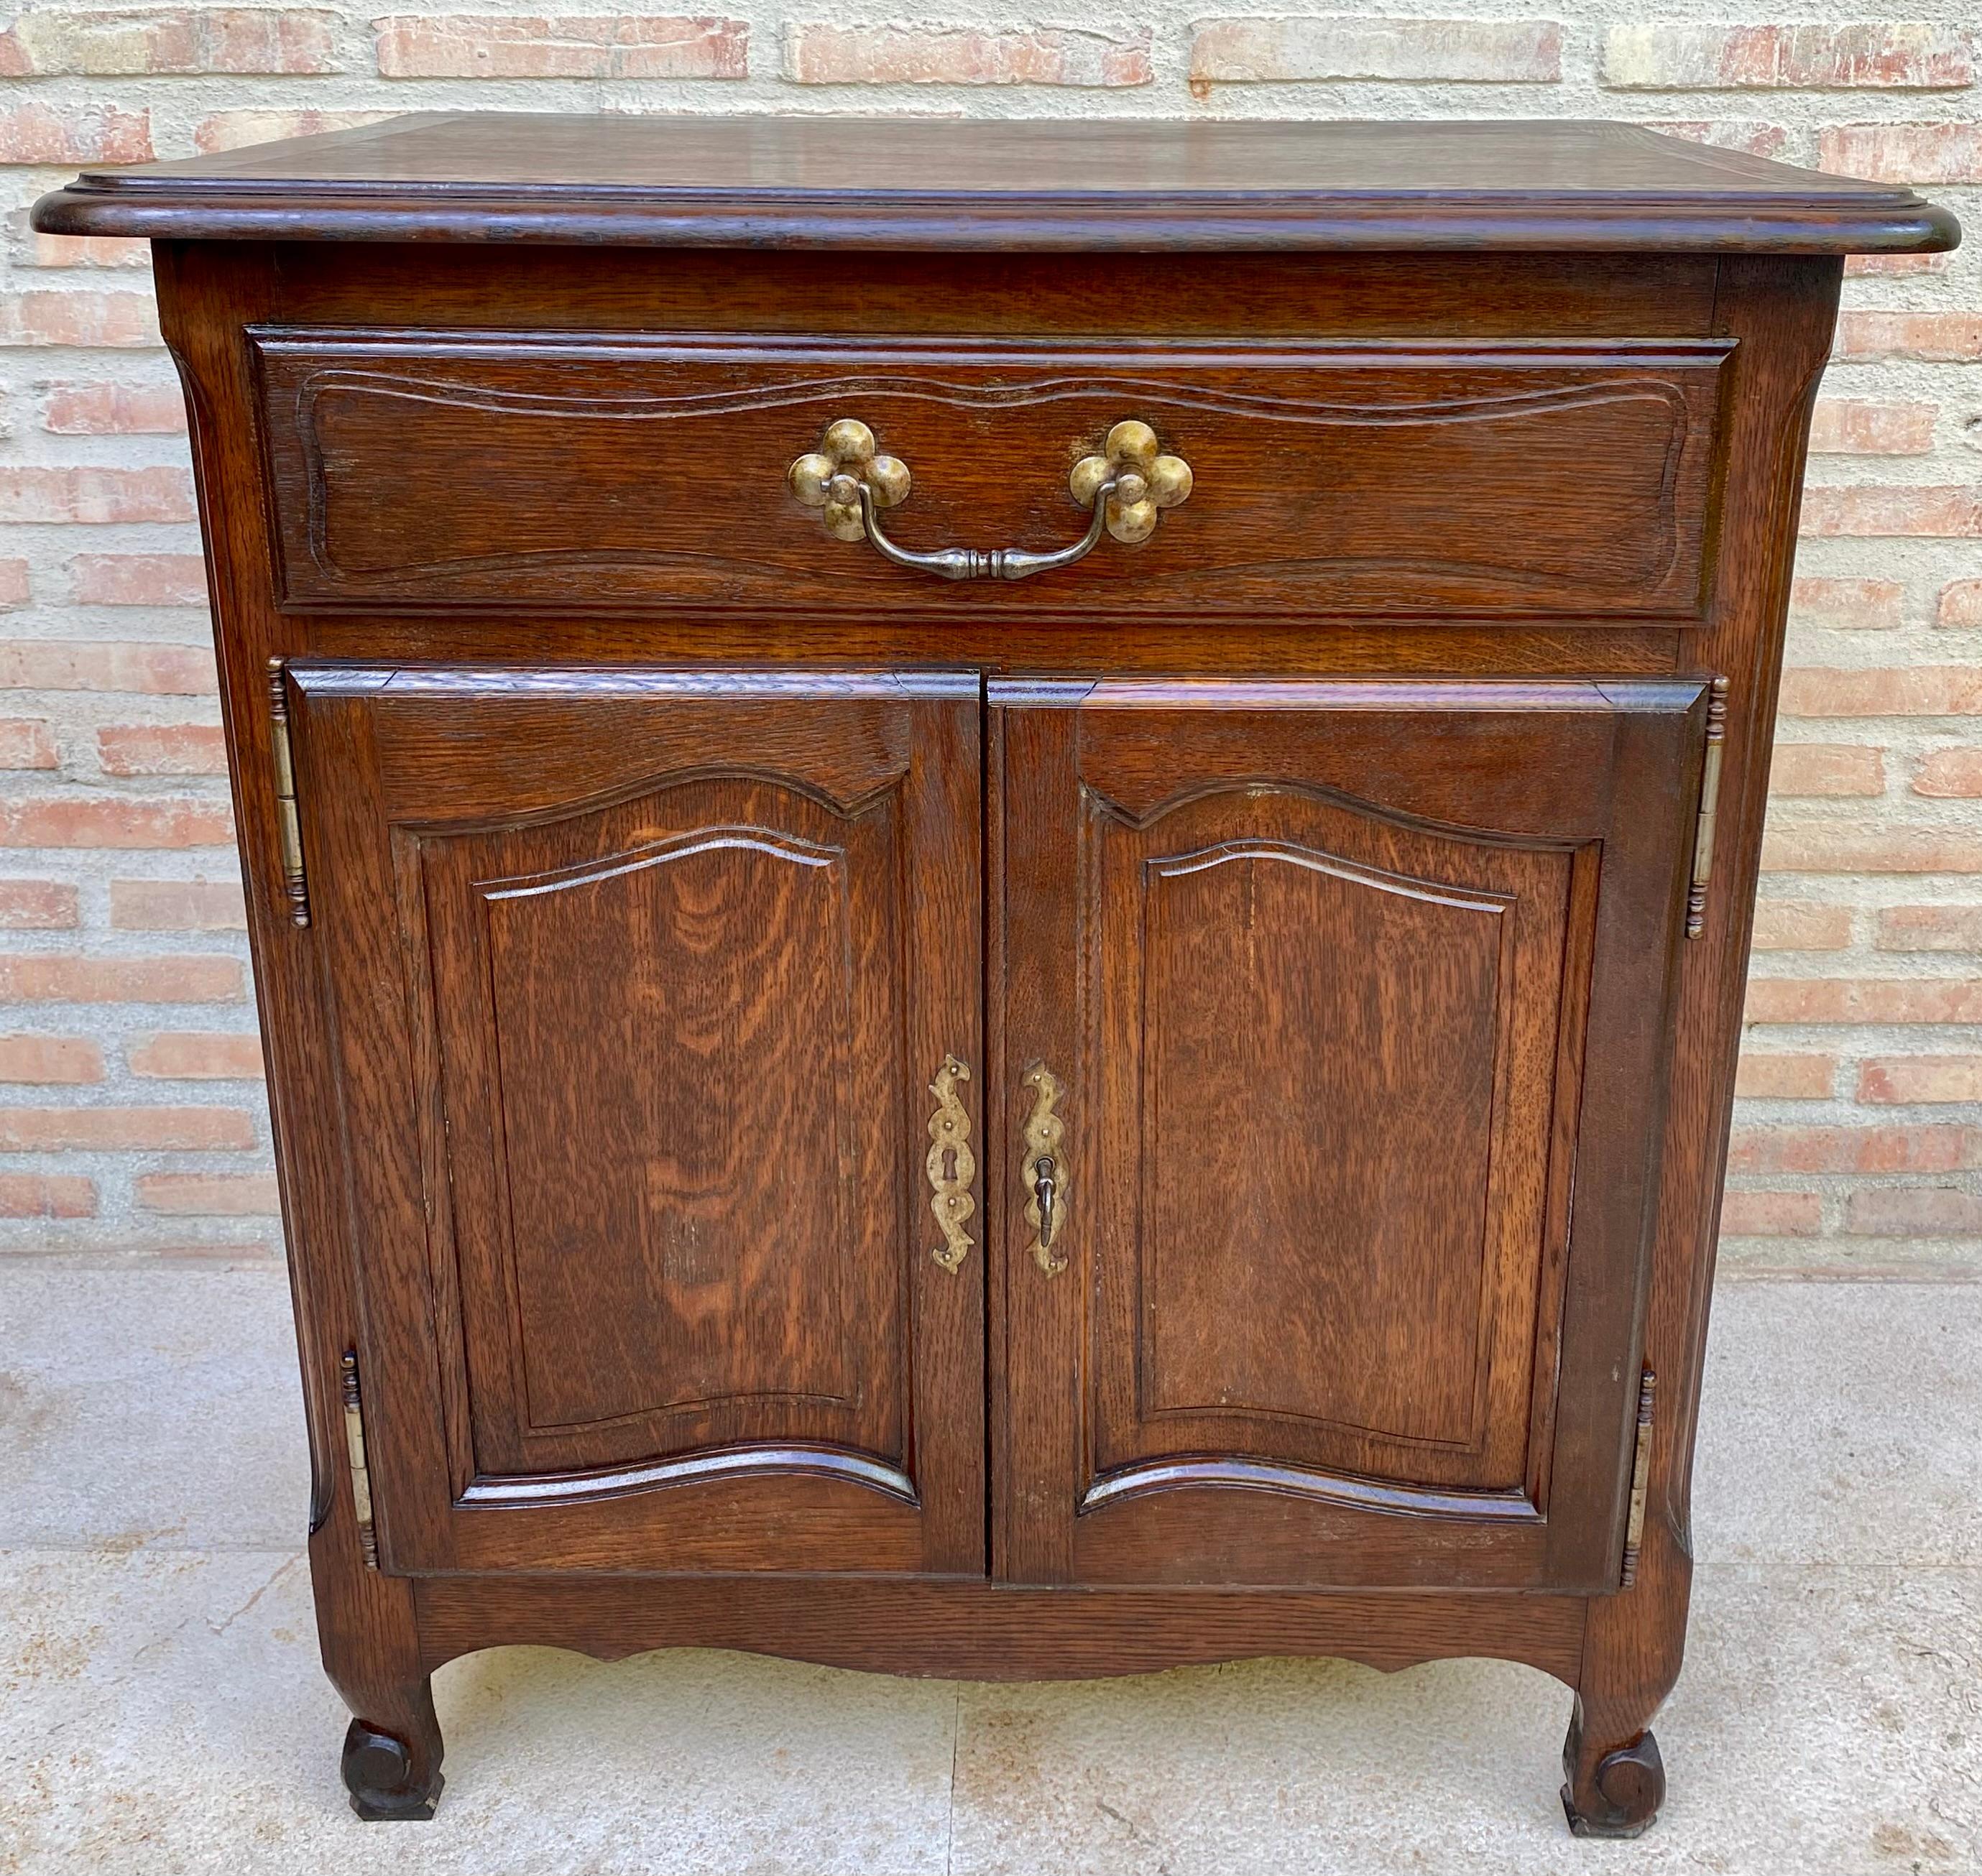 French Provincial Mid-Century French Walnut Side Table with One Drawer and Double Door, 1950s For Sale